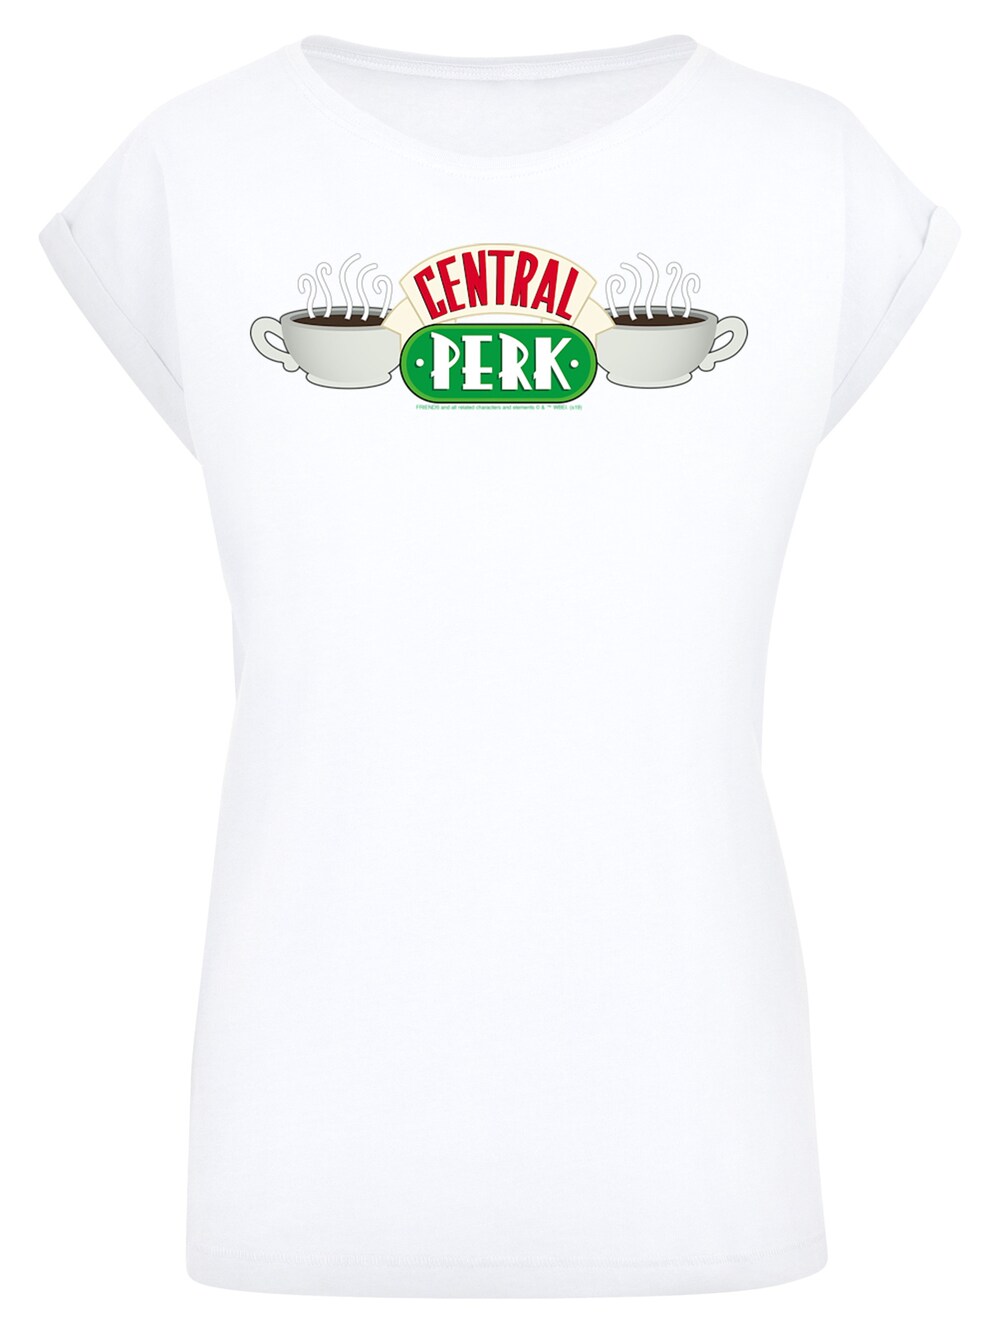 Рубашка F4Nt4Stic Friends Central Perk, белый брелок friends central perk 3d